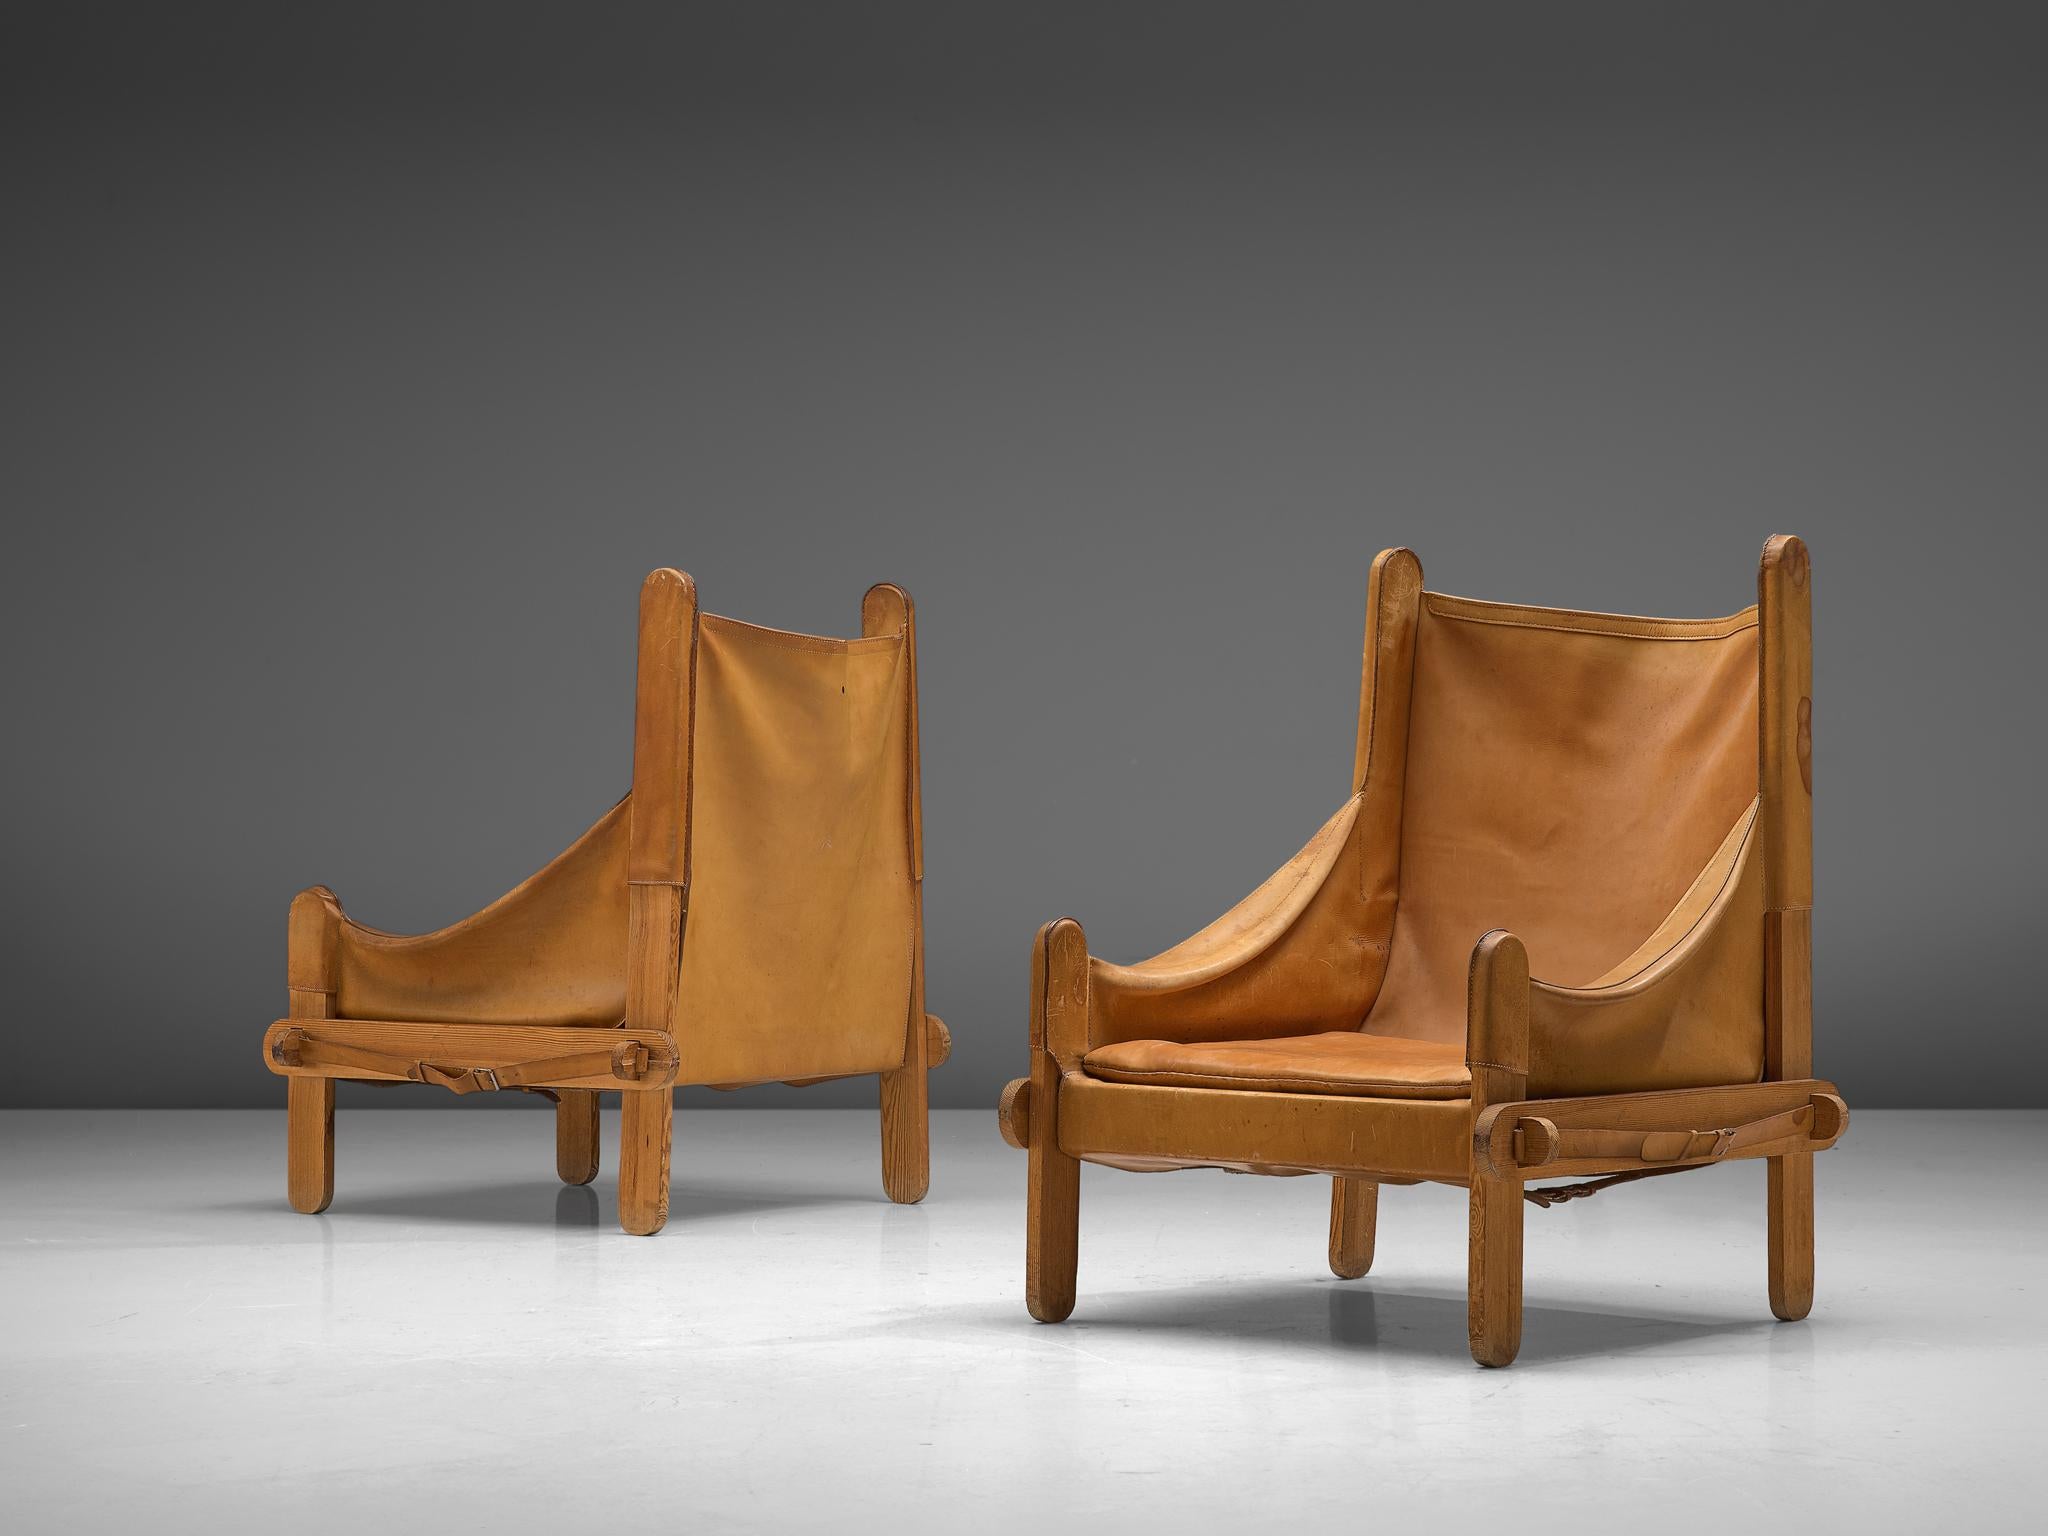 Pair of lounge chairs, leather, wood, metal, France, 1950s

These lounge chairs are characterised by the patinated cognac leather that is adjusted to the wooden frame consisting of wooden slats with round ends. The warm colored leather is attached